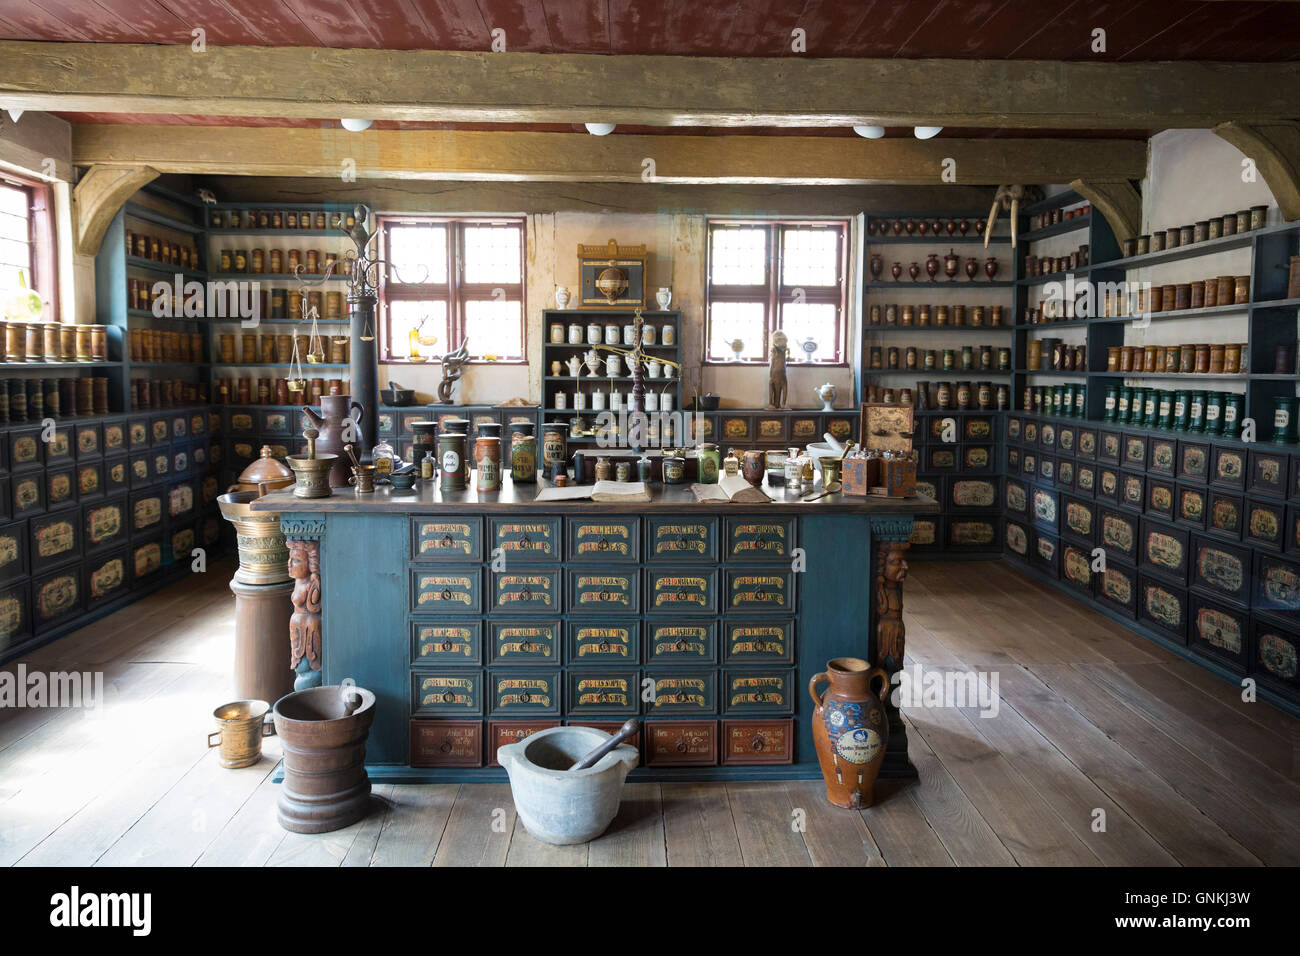 Pharmacy / apothecary interior at Den Gamle By, The Old Town, open-air folk museum at Aarhus,  East Jutland, Denmark Stock Photo